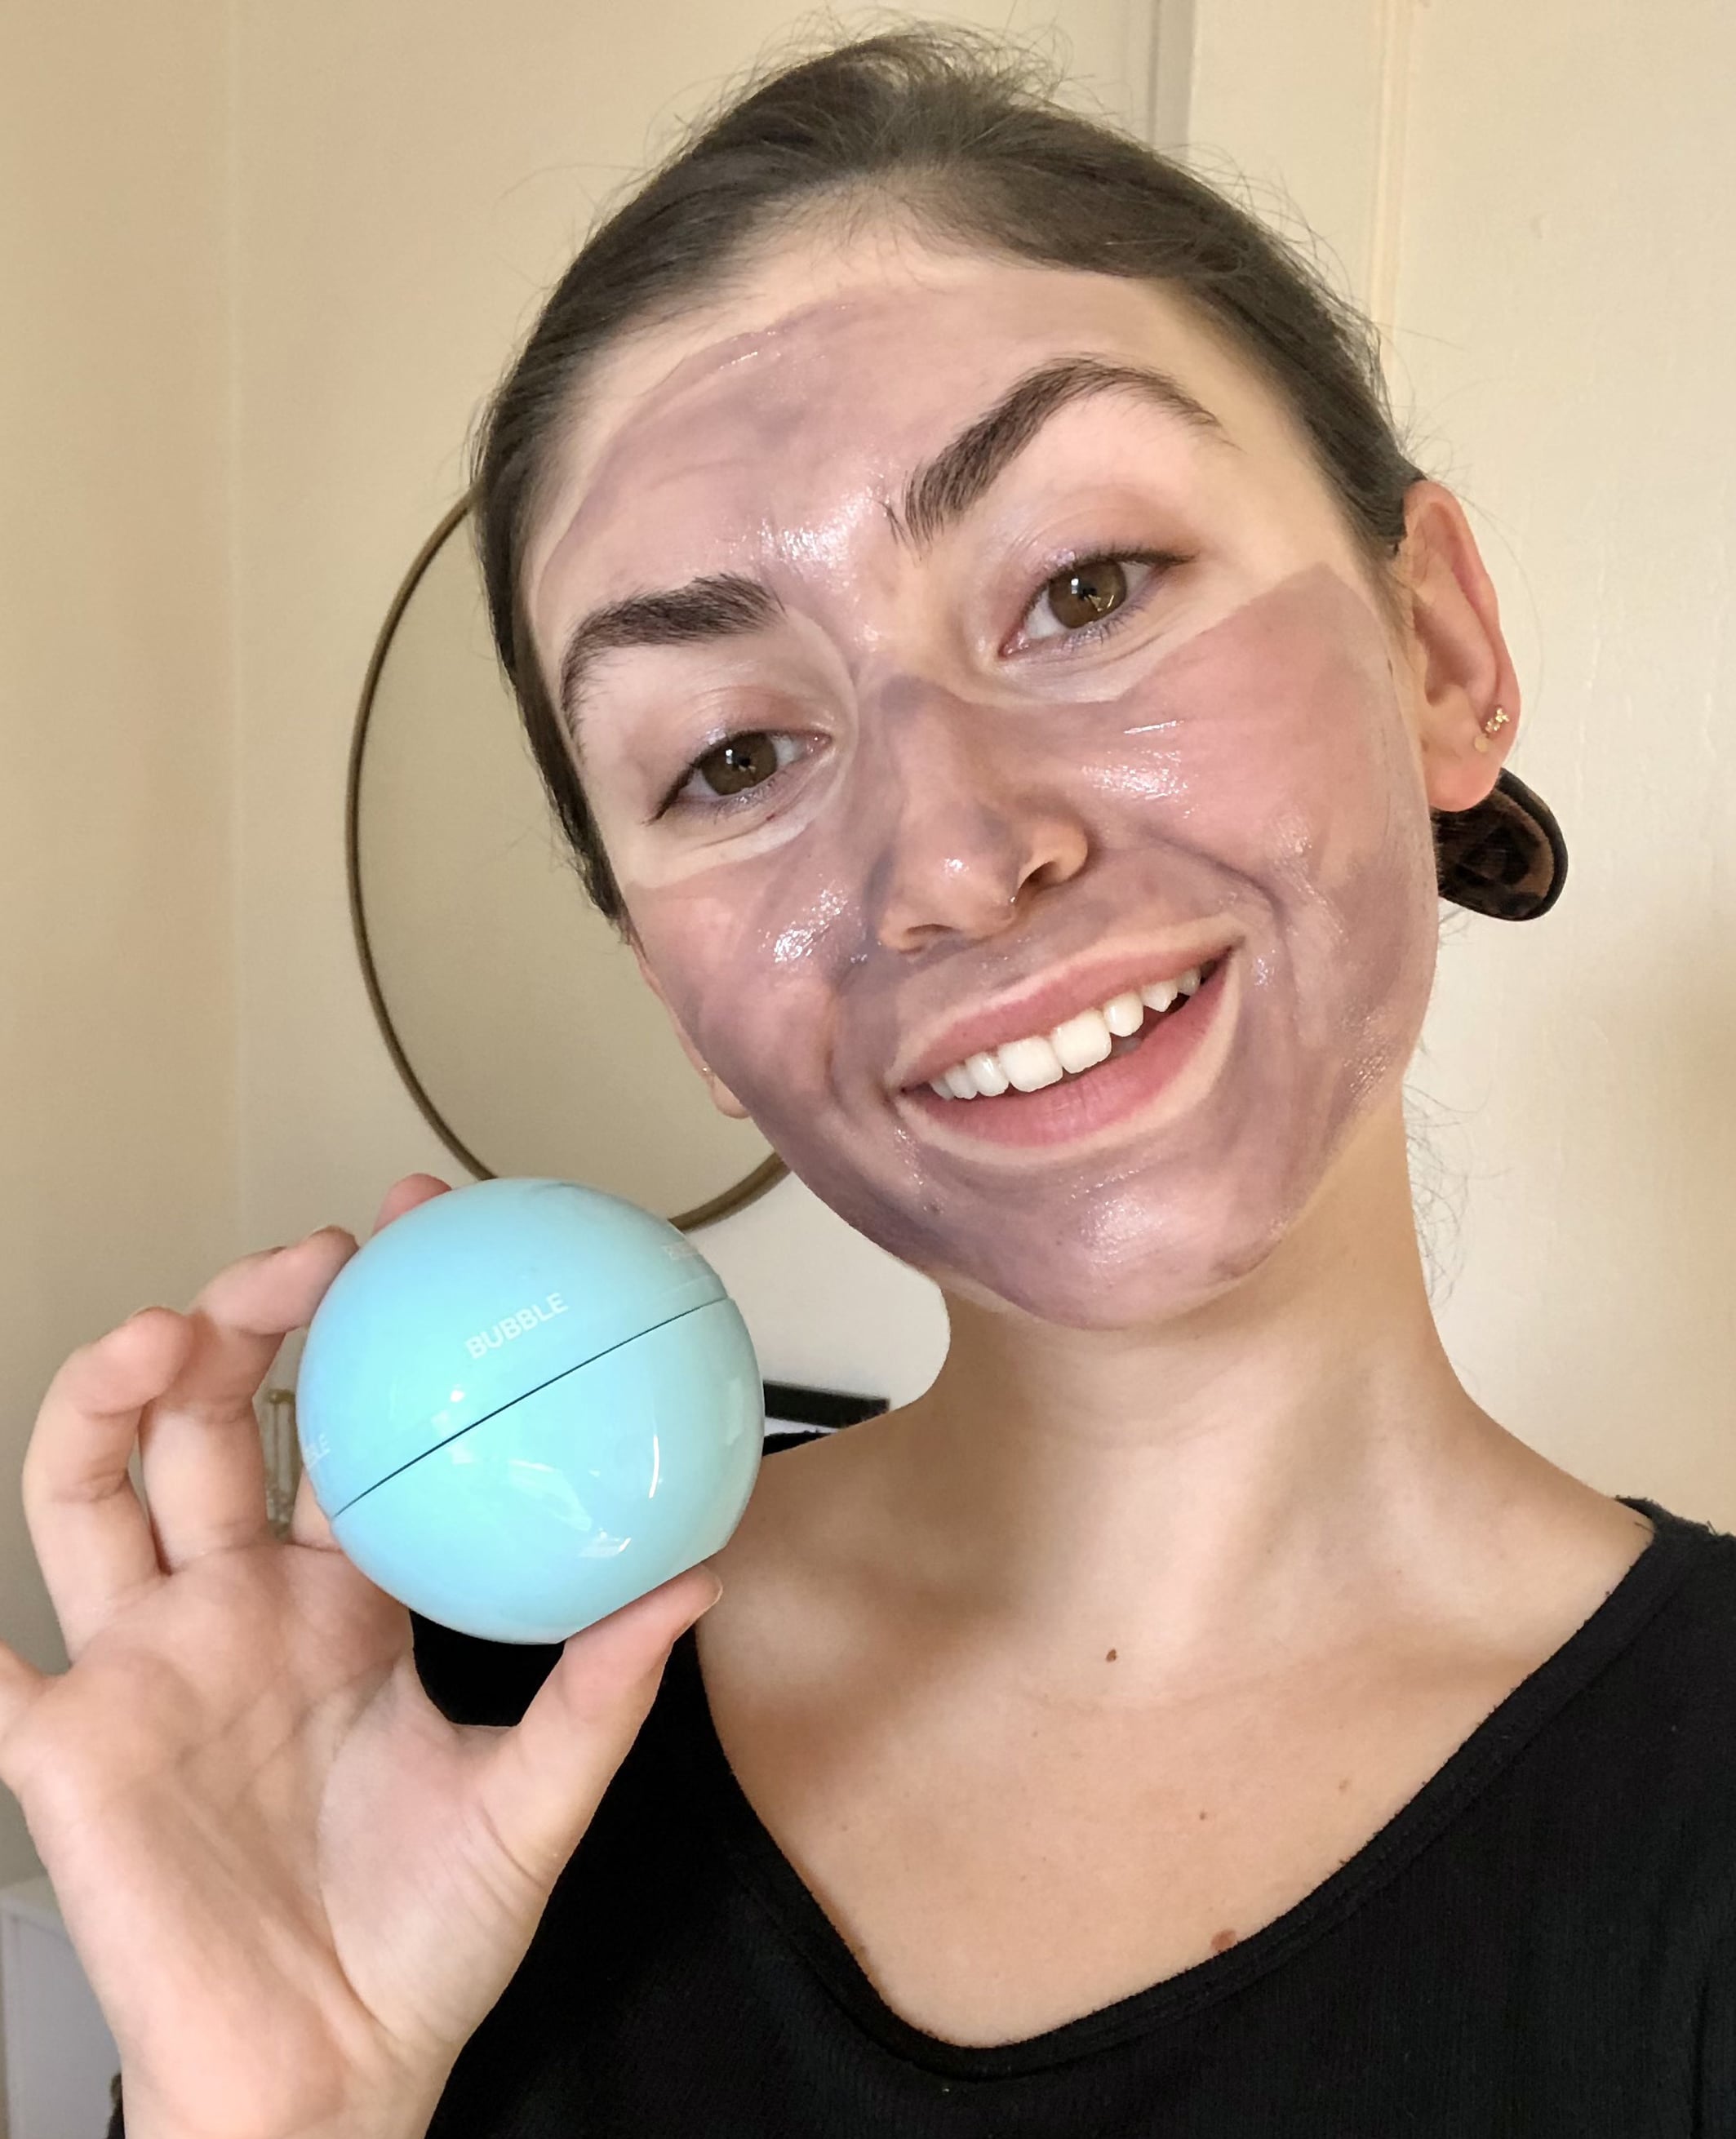 BUBBLE SKINCARE ROUTINE & REVIEW  Teen Skincare Brand Now At Walmart 